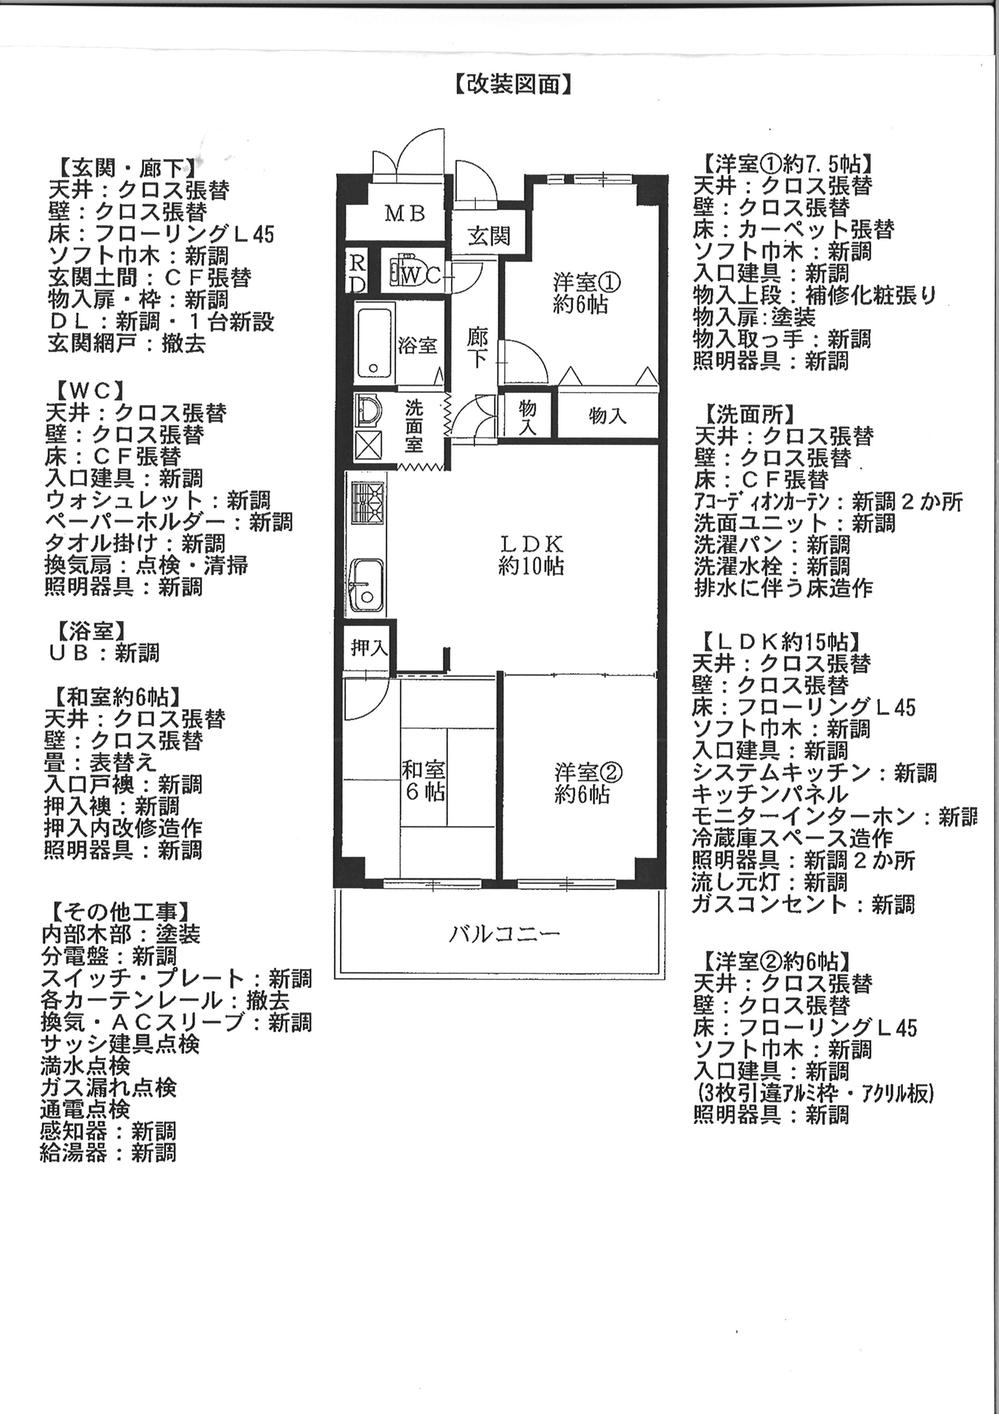 Floor plan. 3LDK, Price 13.8 million yen, Occupied area 67.95 sq m , Balcony area 8.55 sq m   ☆ Fully renovated ☆ Room, Reborn in the same way new construction.